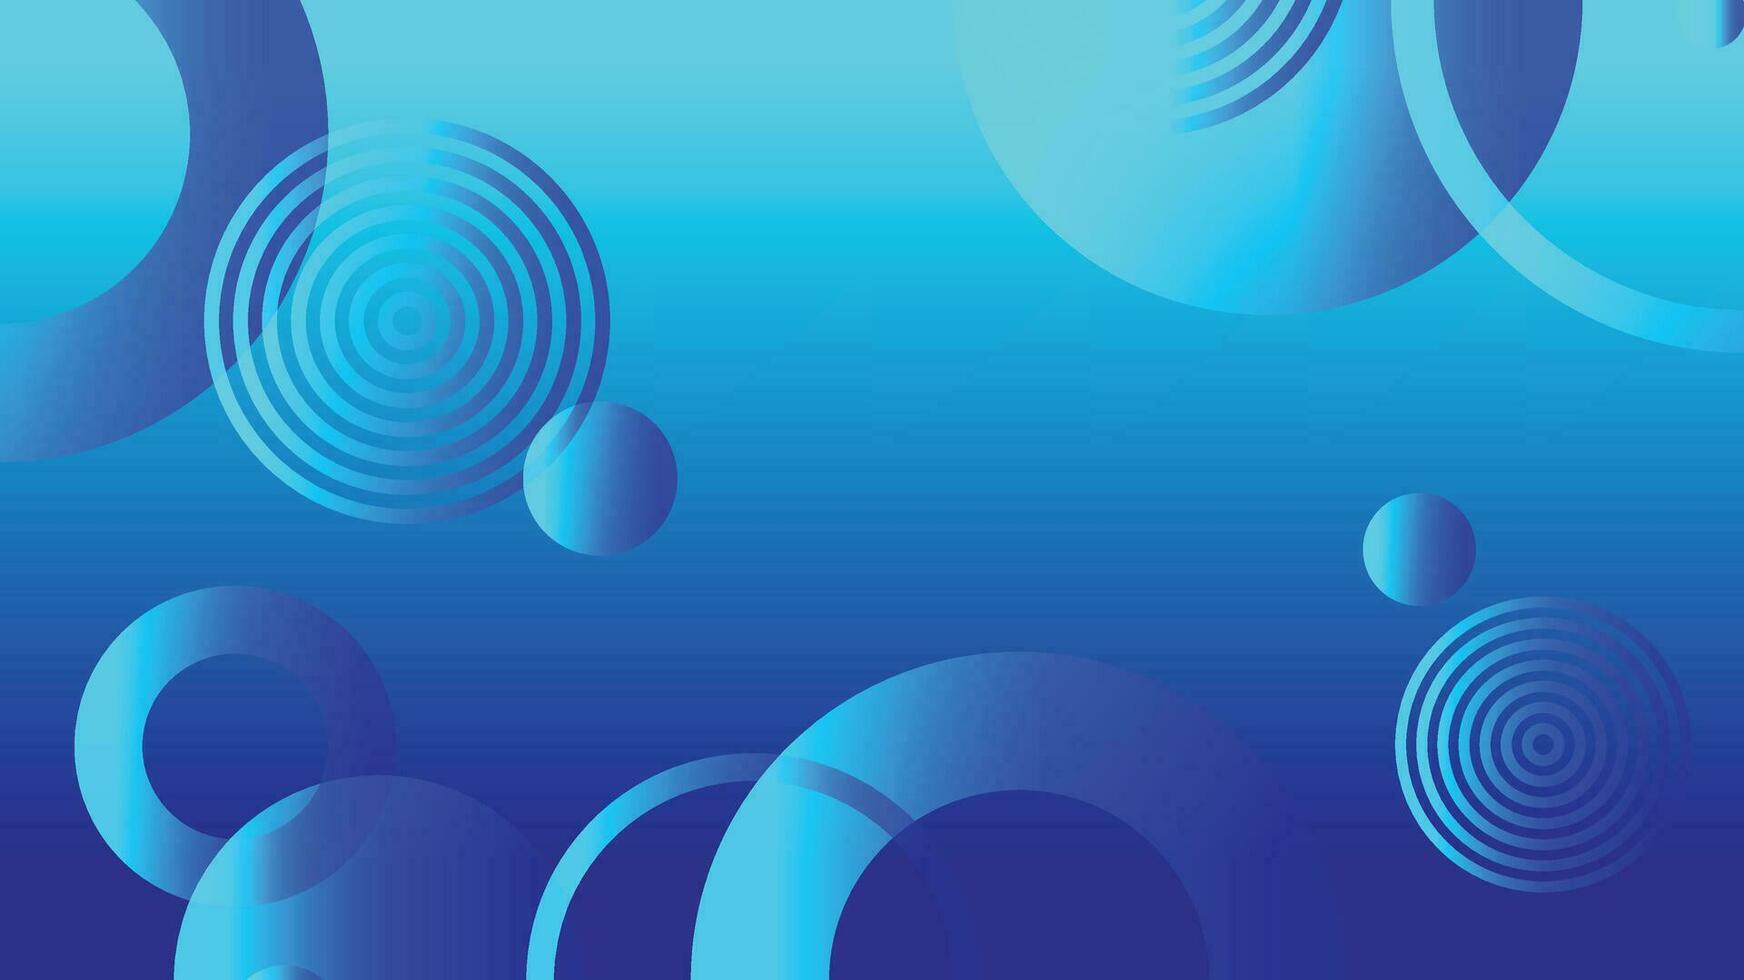 Blue abstract circle gradient modern graphic background vector